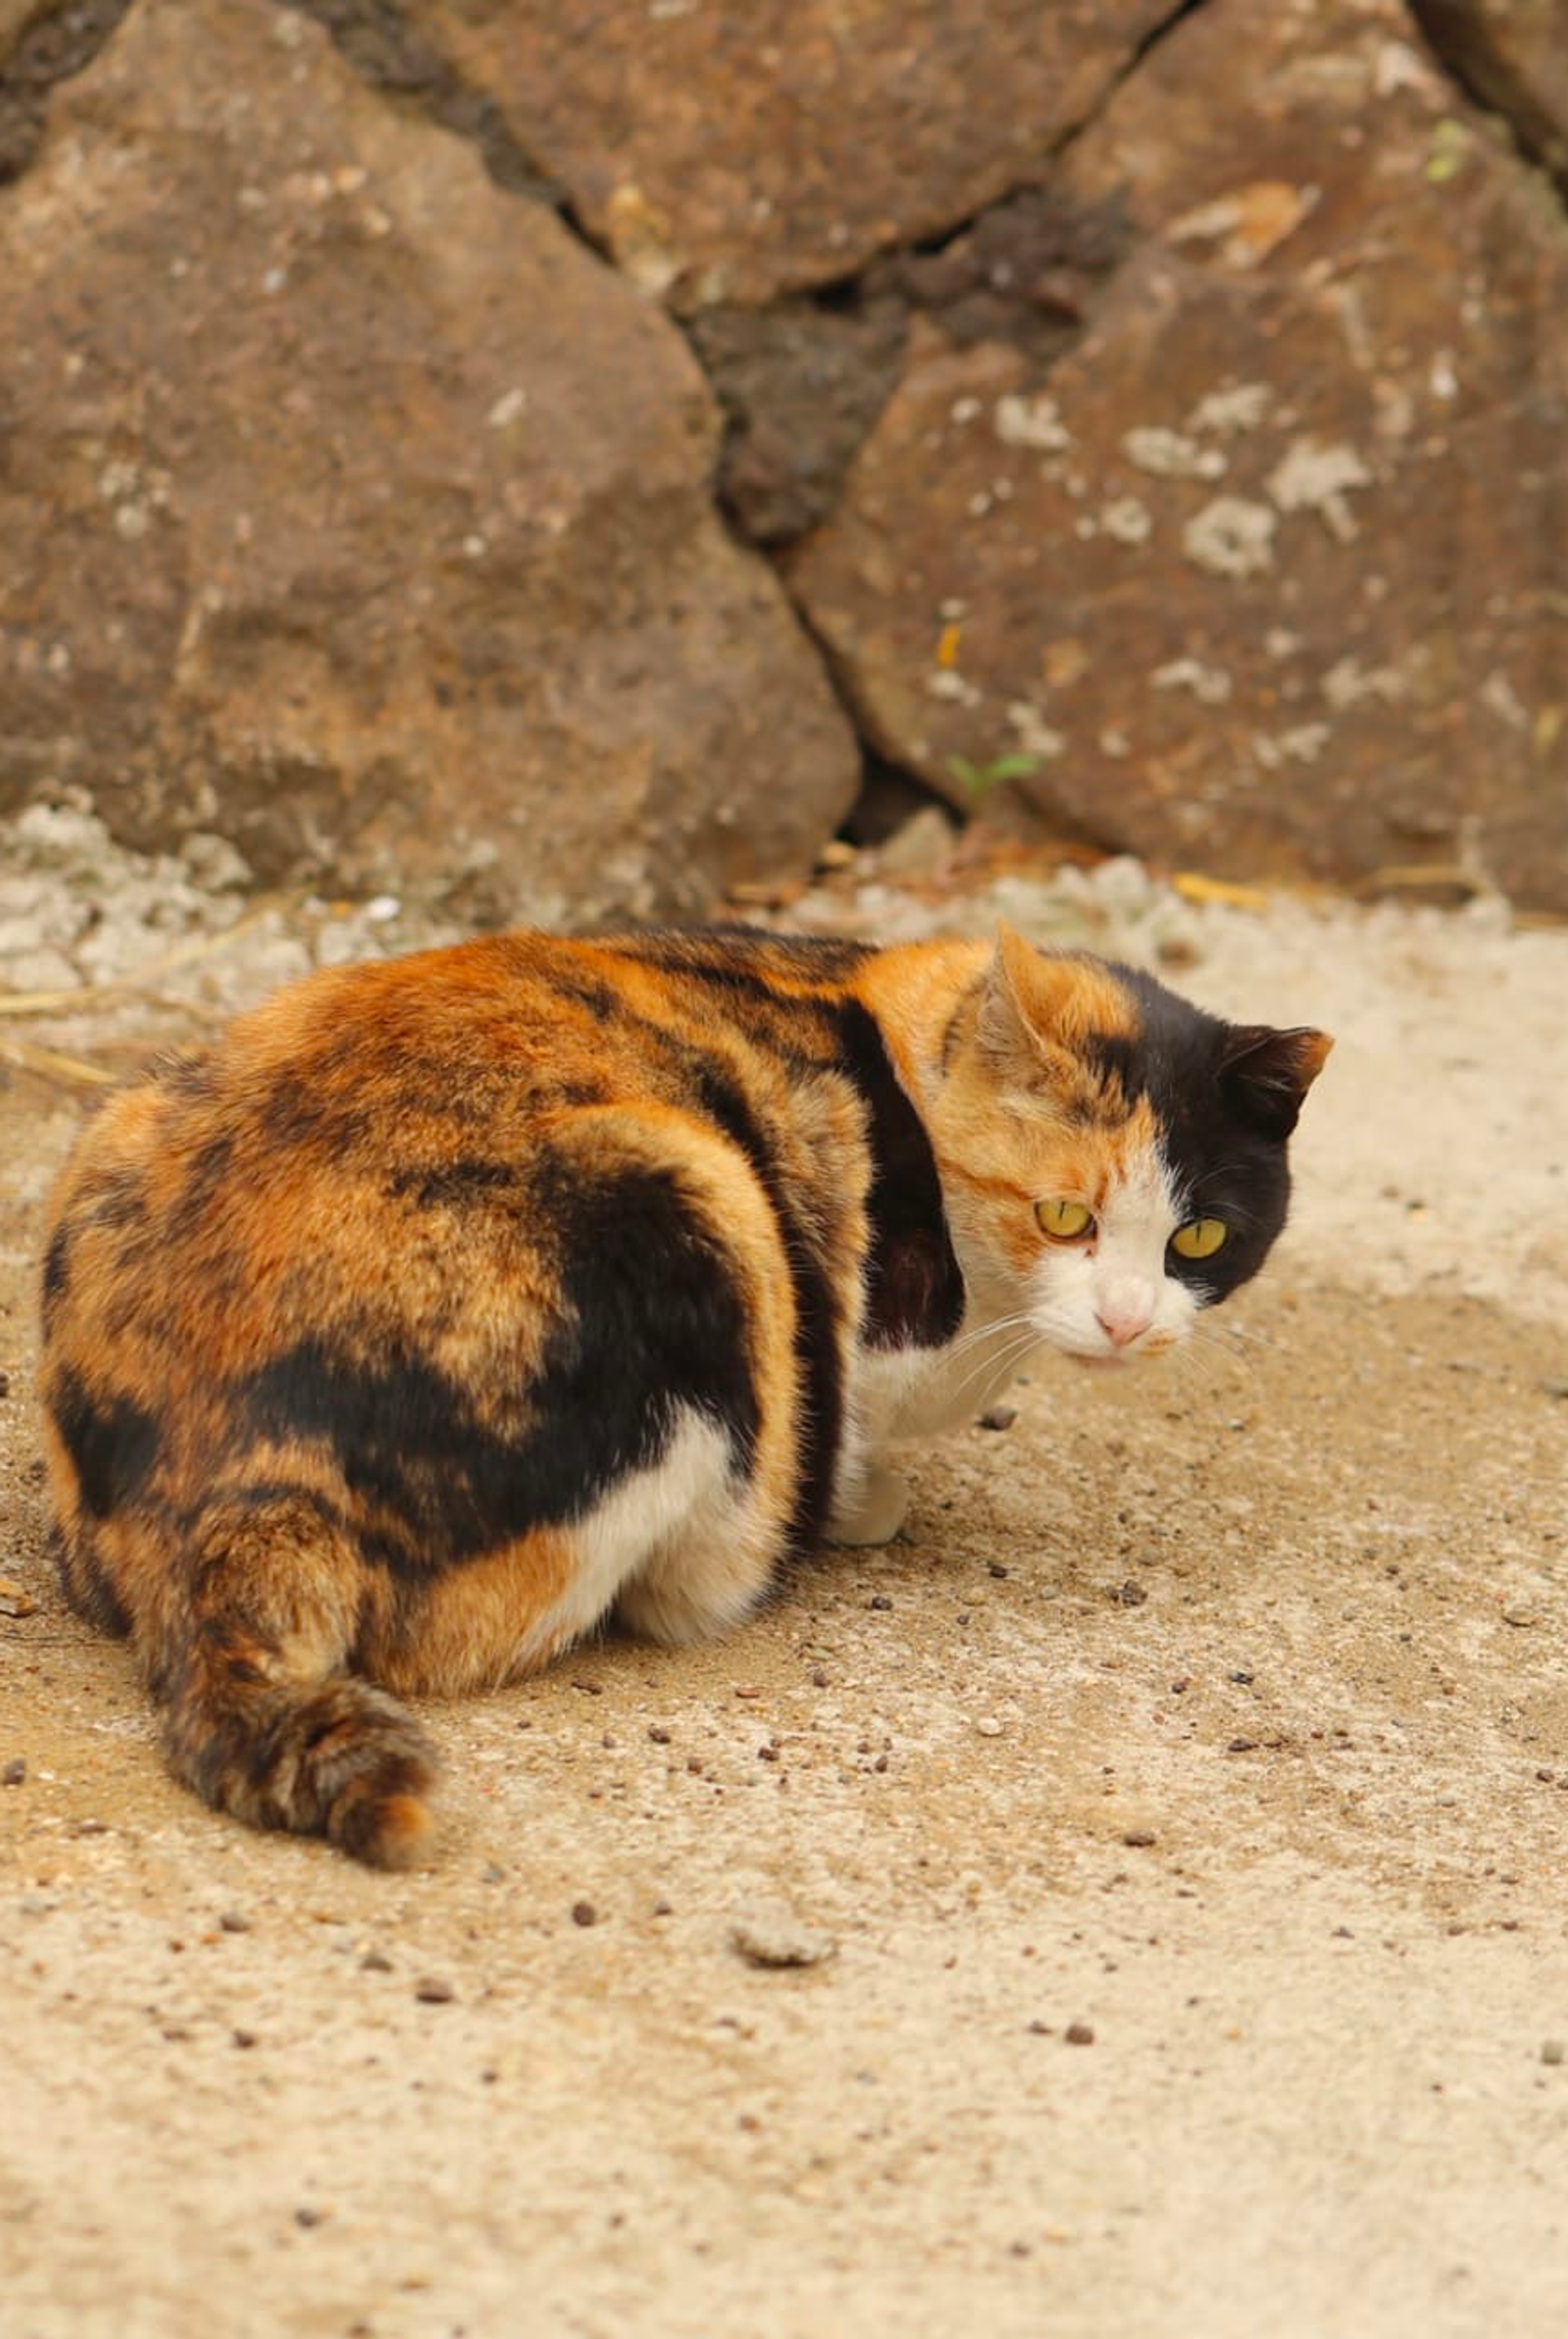  A ginger, black and white cat hunched down, back towards us, but turning around to face the camera, on a dusty, gravel ground, in front of some rocks, by Dayun Jung.